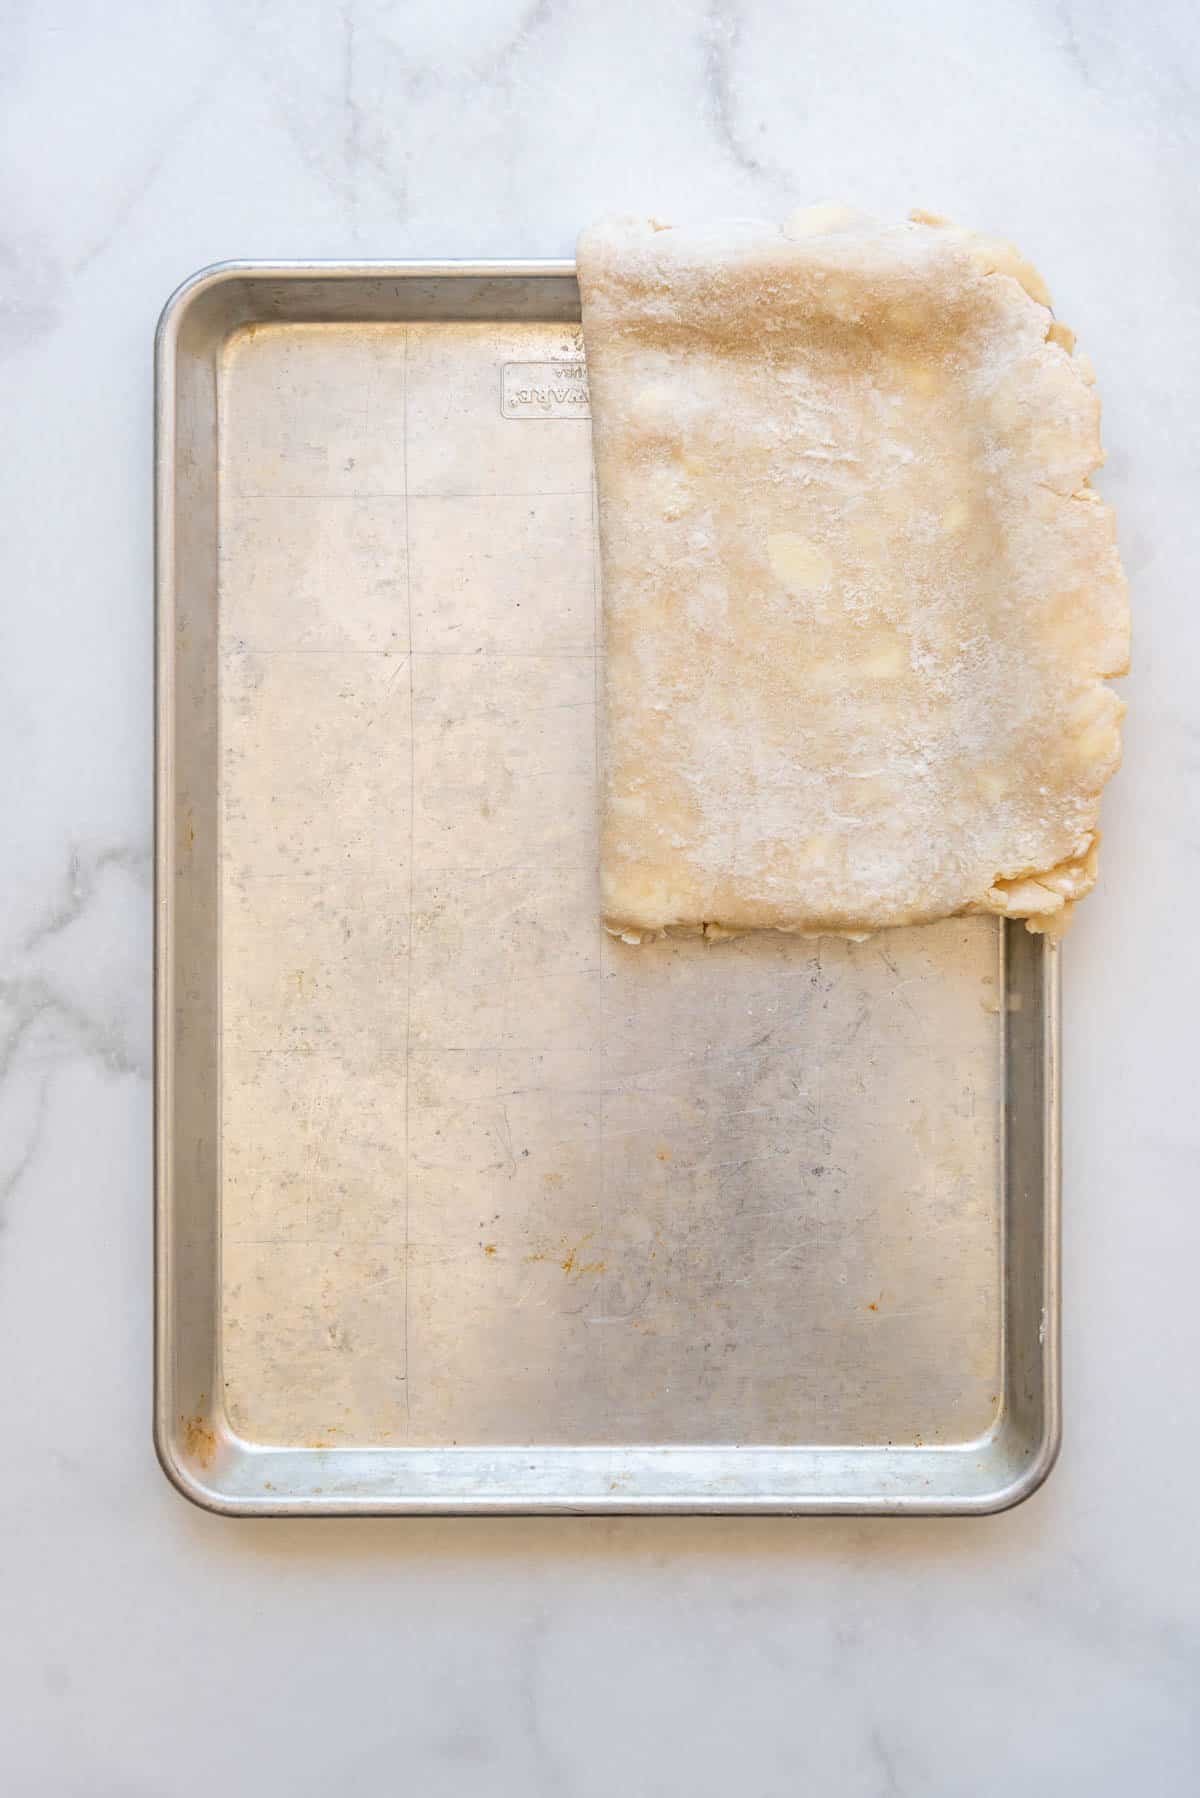 Laying a folded pie crust onto a large baking sheet.